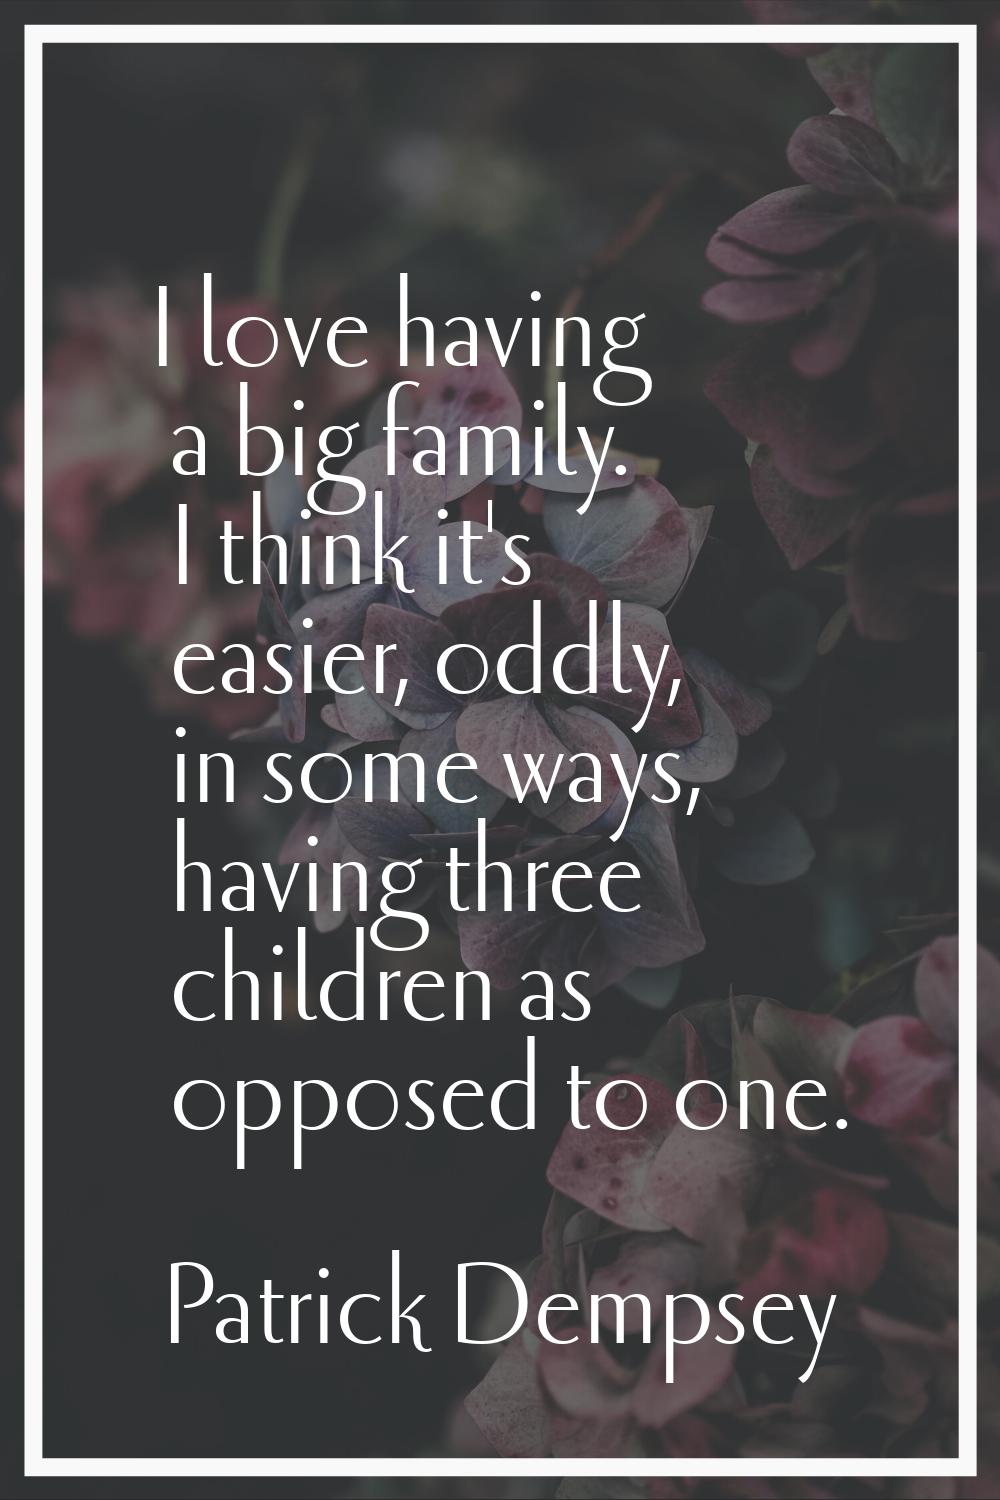 I love having a big family. I think it's easier, oddly, in some ways, having three children as oppo